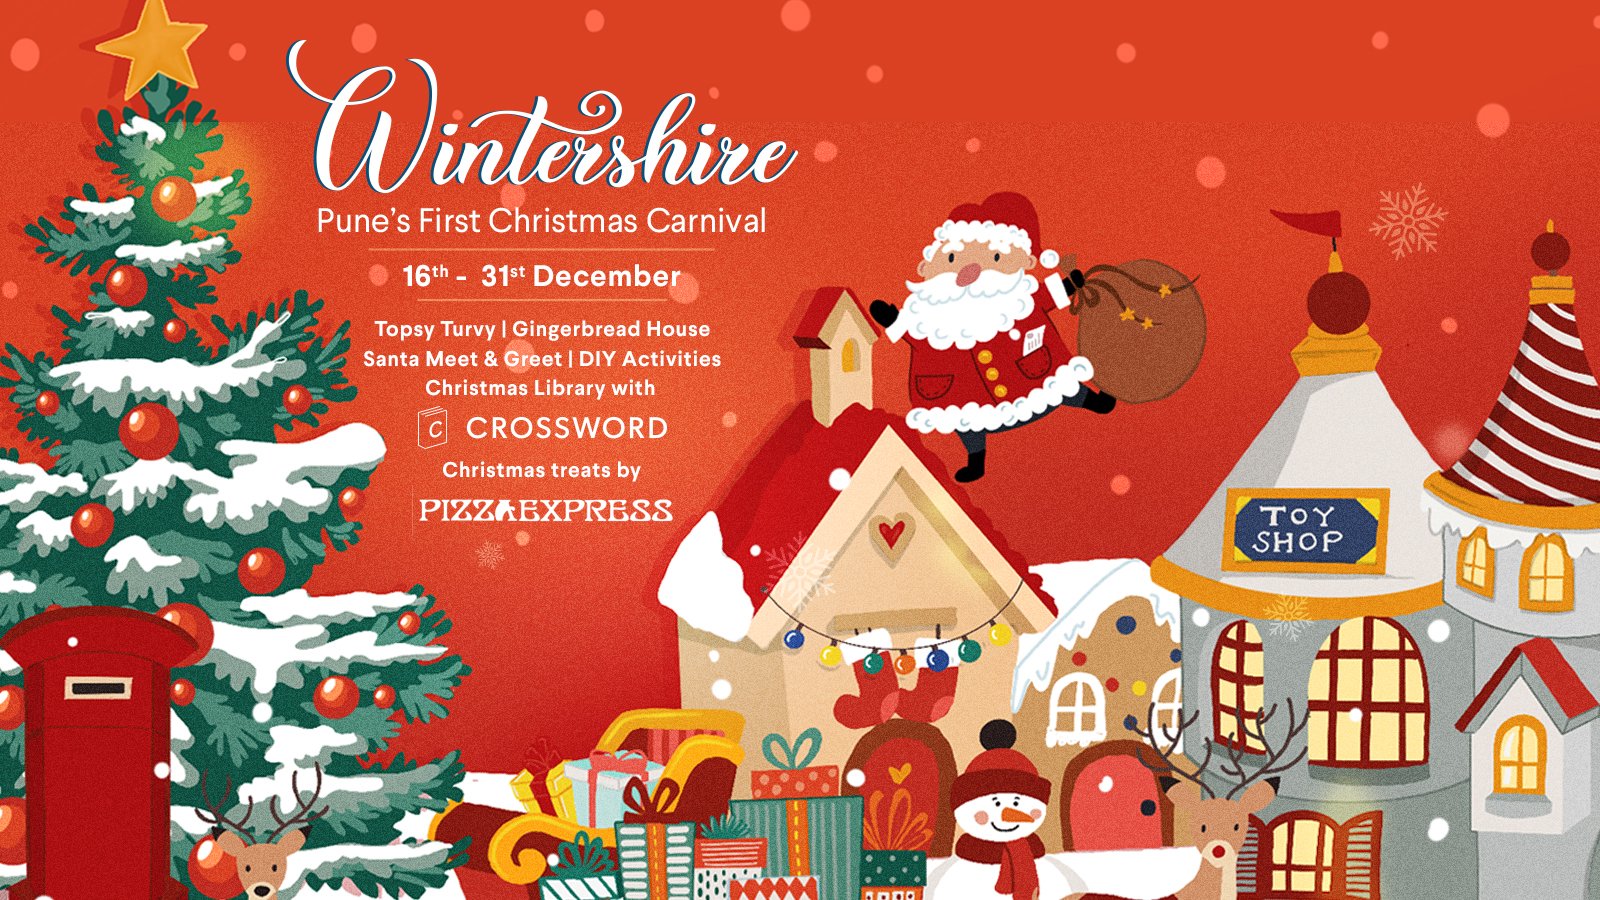 Image: Wintershire- Pune’s First Christmas Carnival